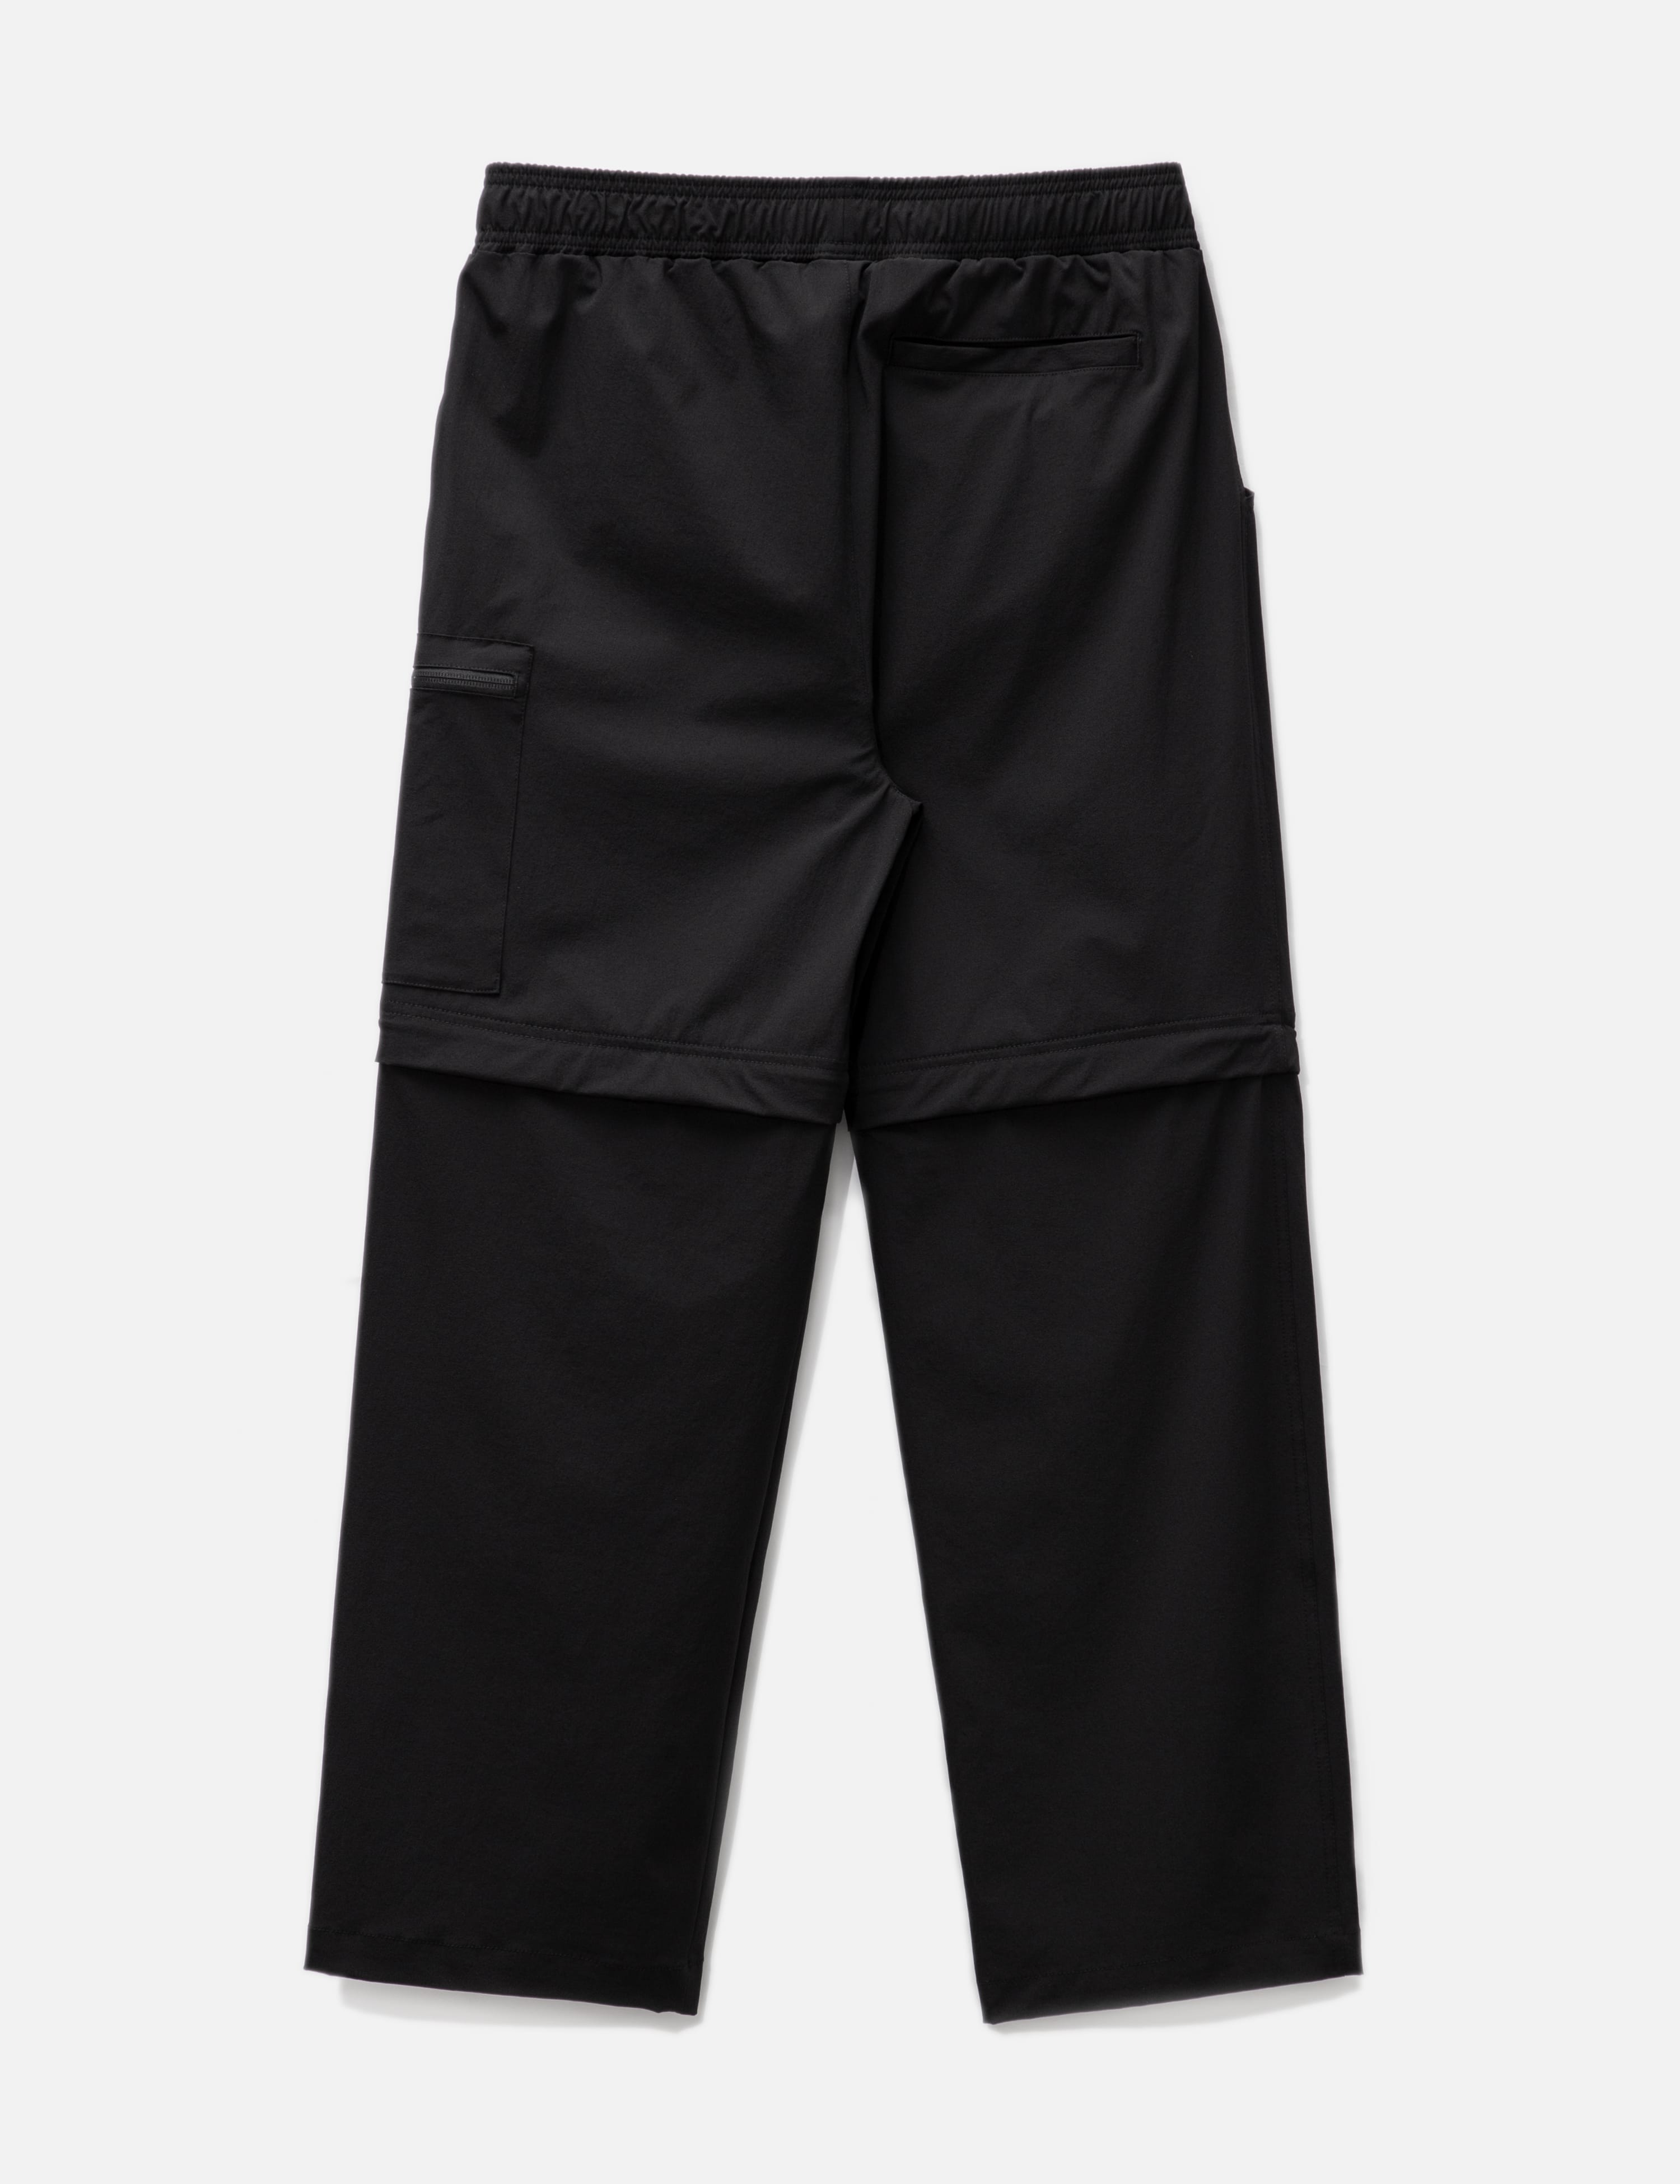 Dime - HIKING ZIP-OFF PANTS | HBX - Globally Curated Fashion and